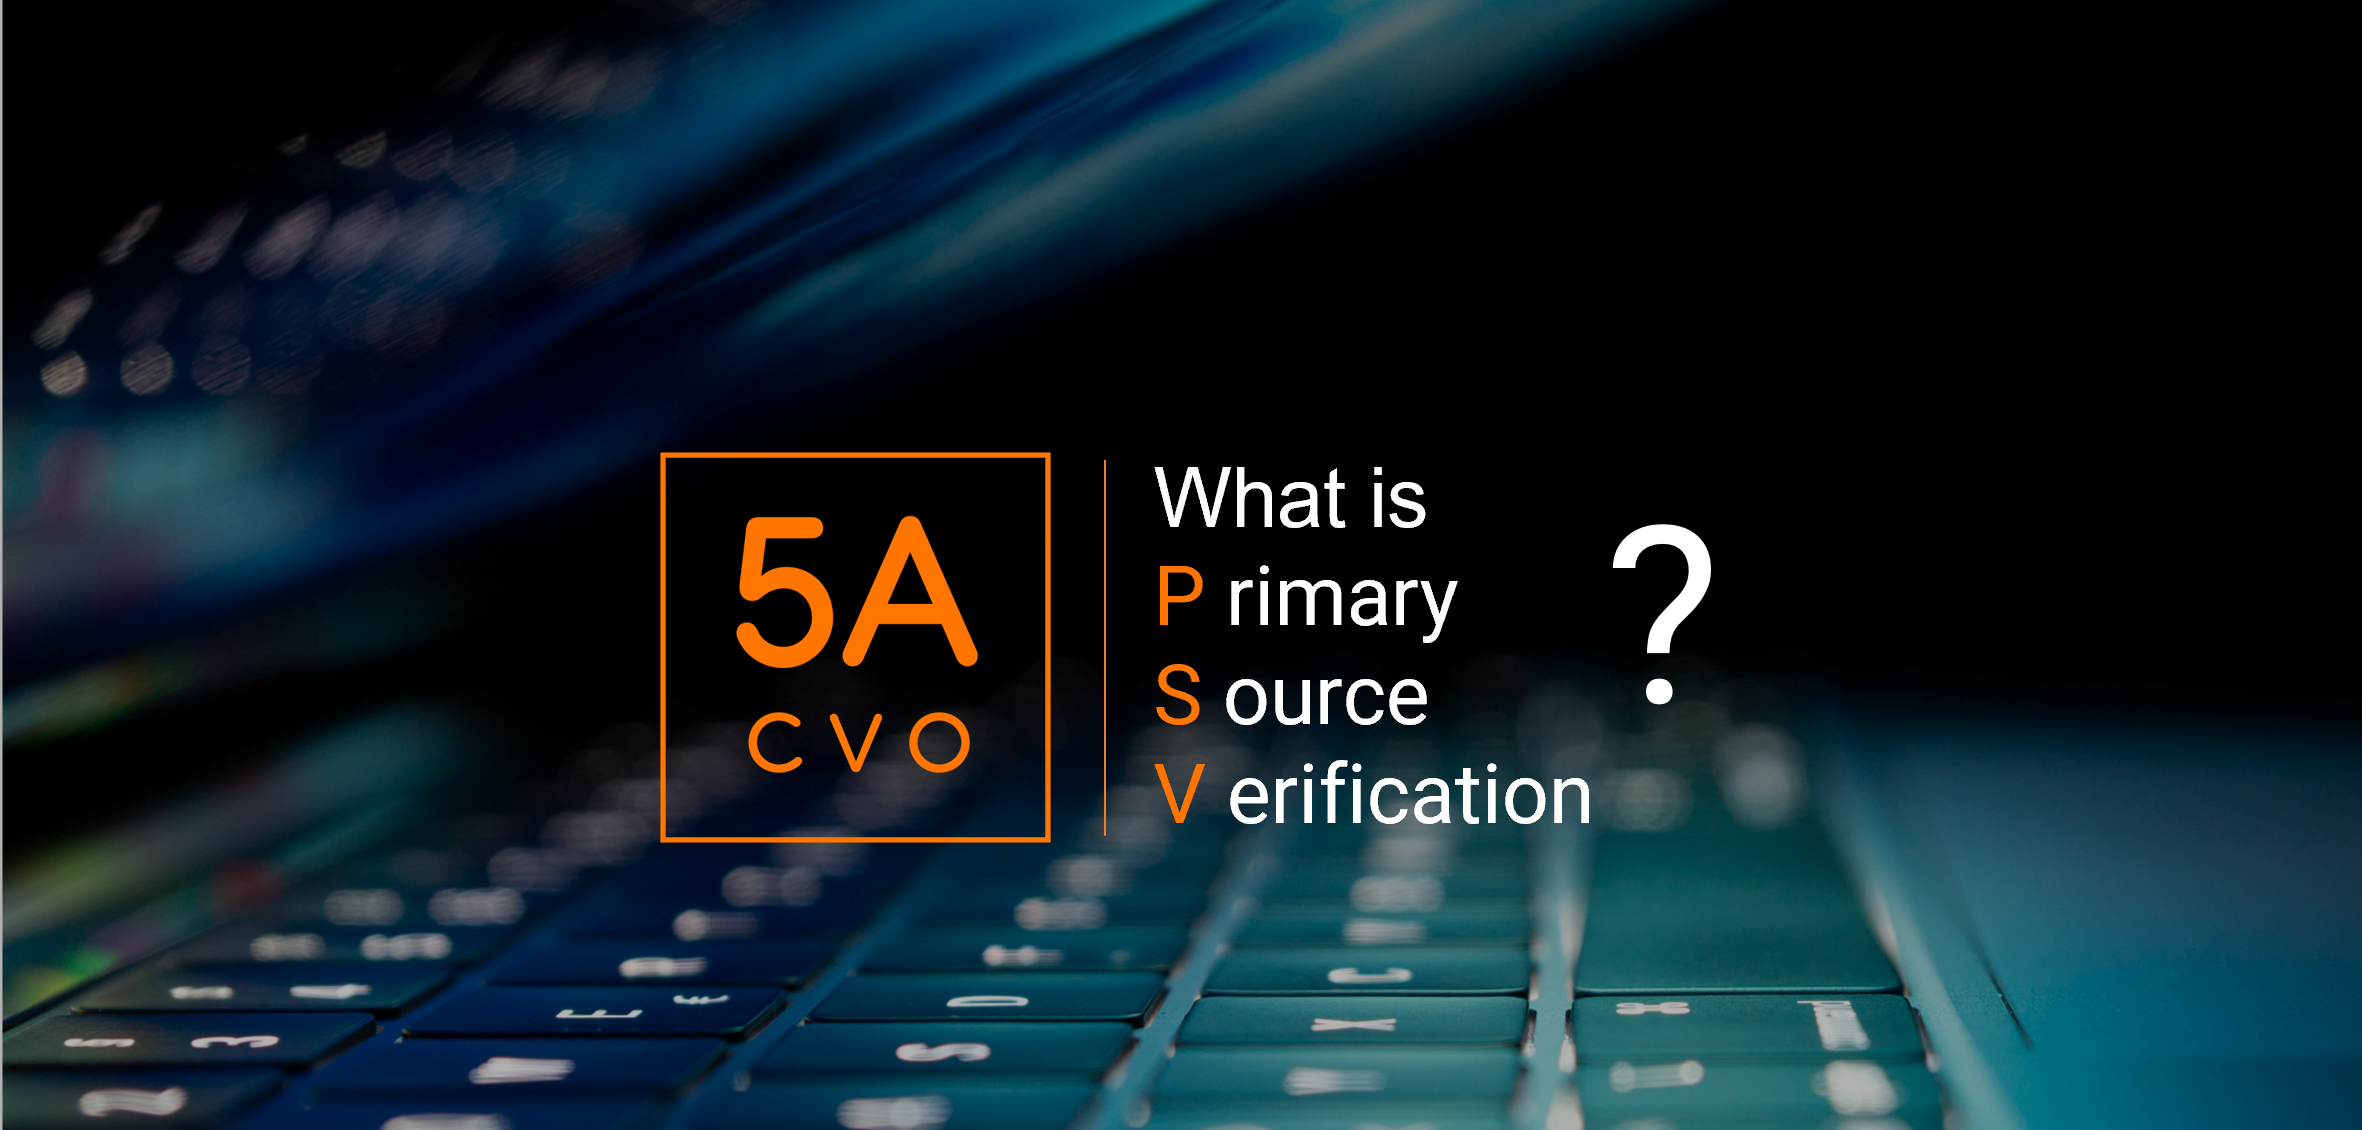 What Is Primary Source Verification